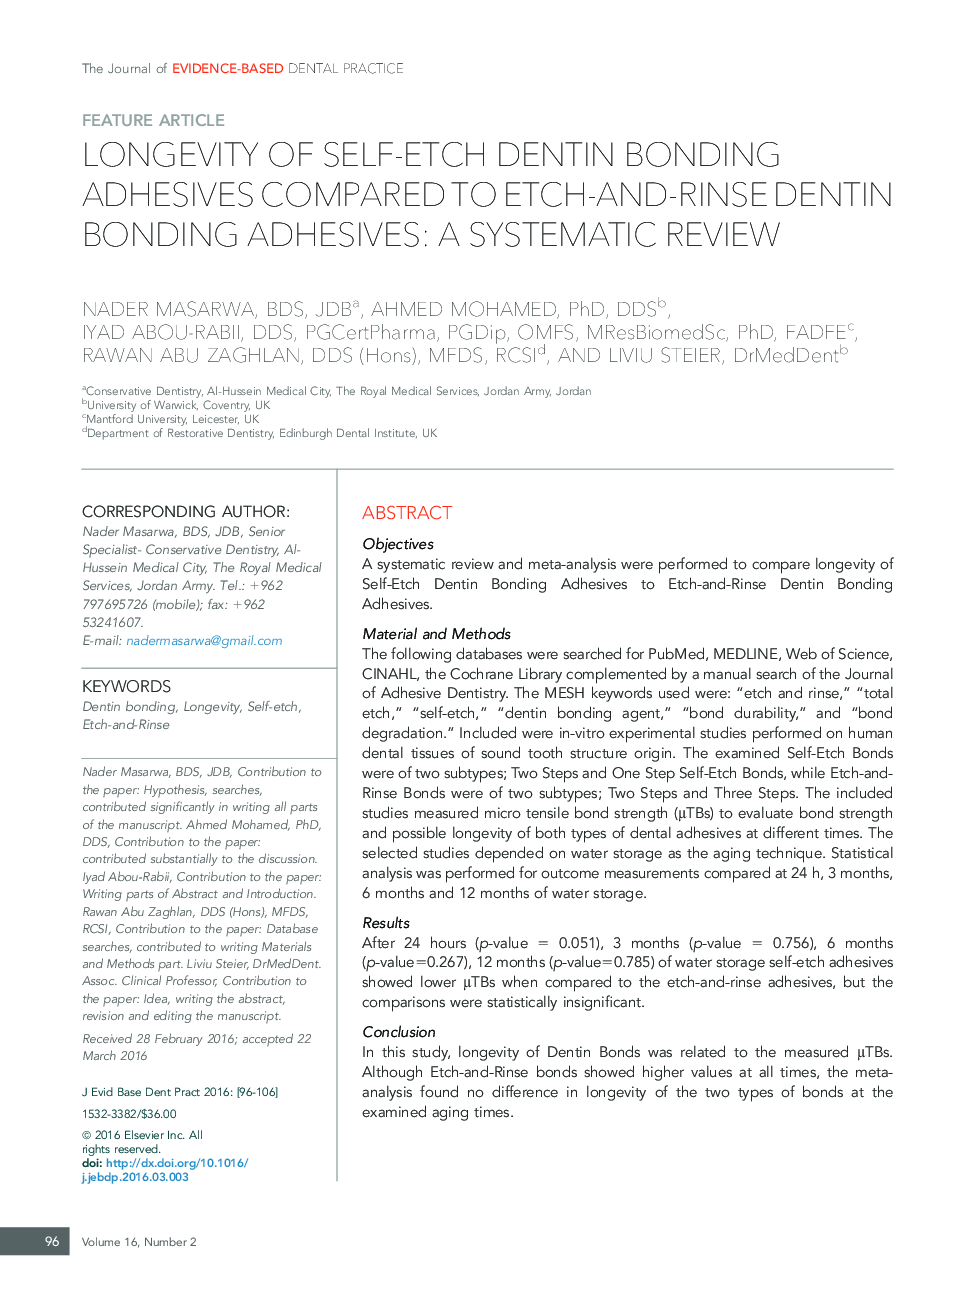 Longevity of Self-etch Dentin Bonding Adhesives Compared to Etch-and-rinse Dentin Bonding Adhesives: A Systematic Review 